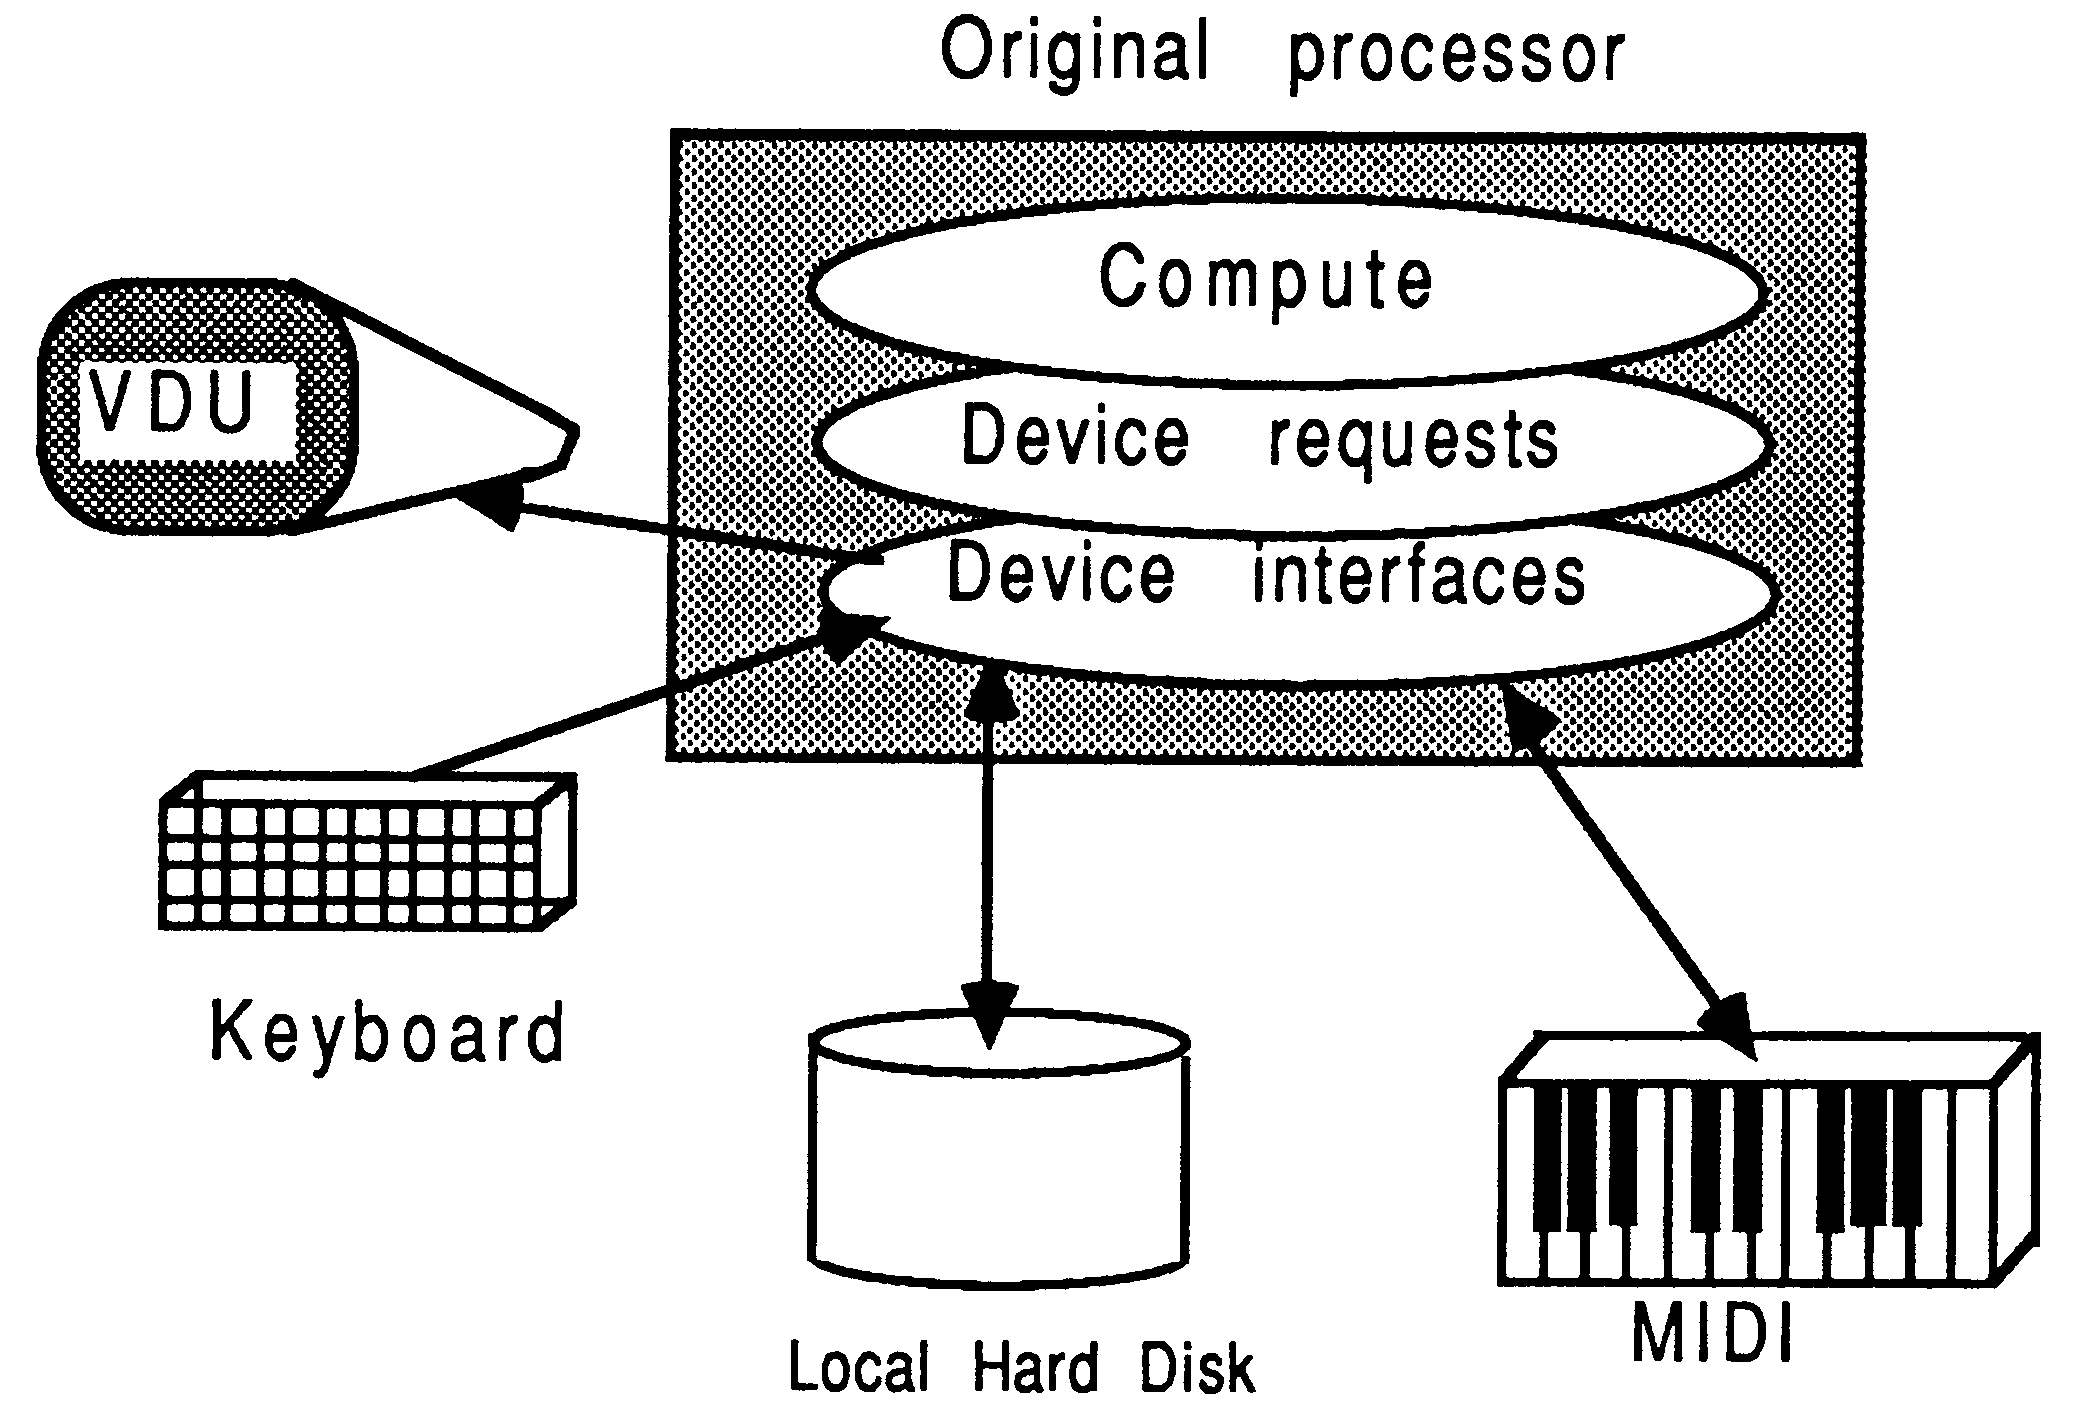 Before a mixed-processor porting